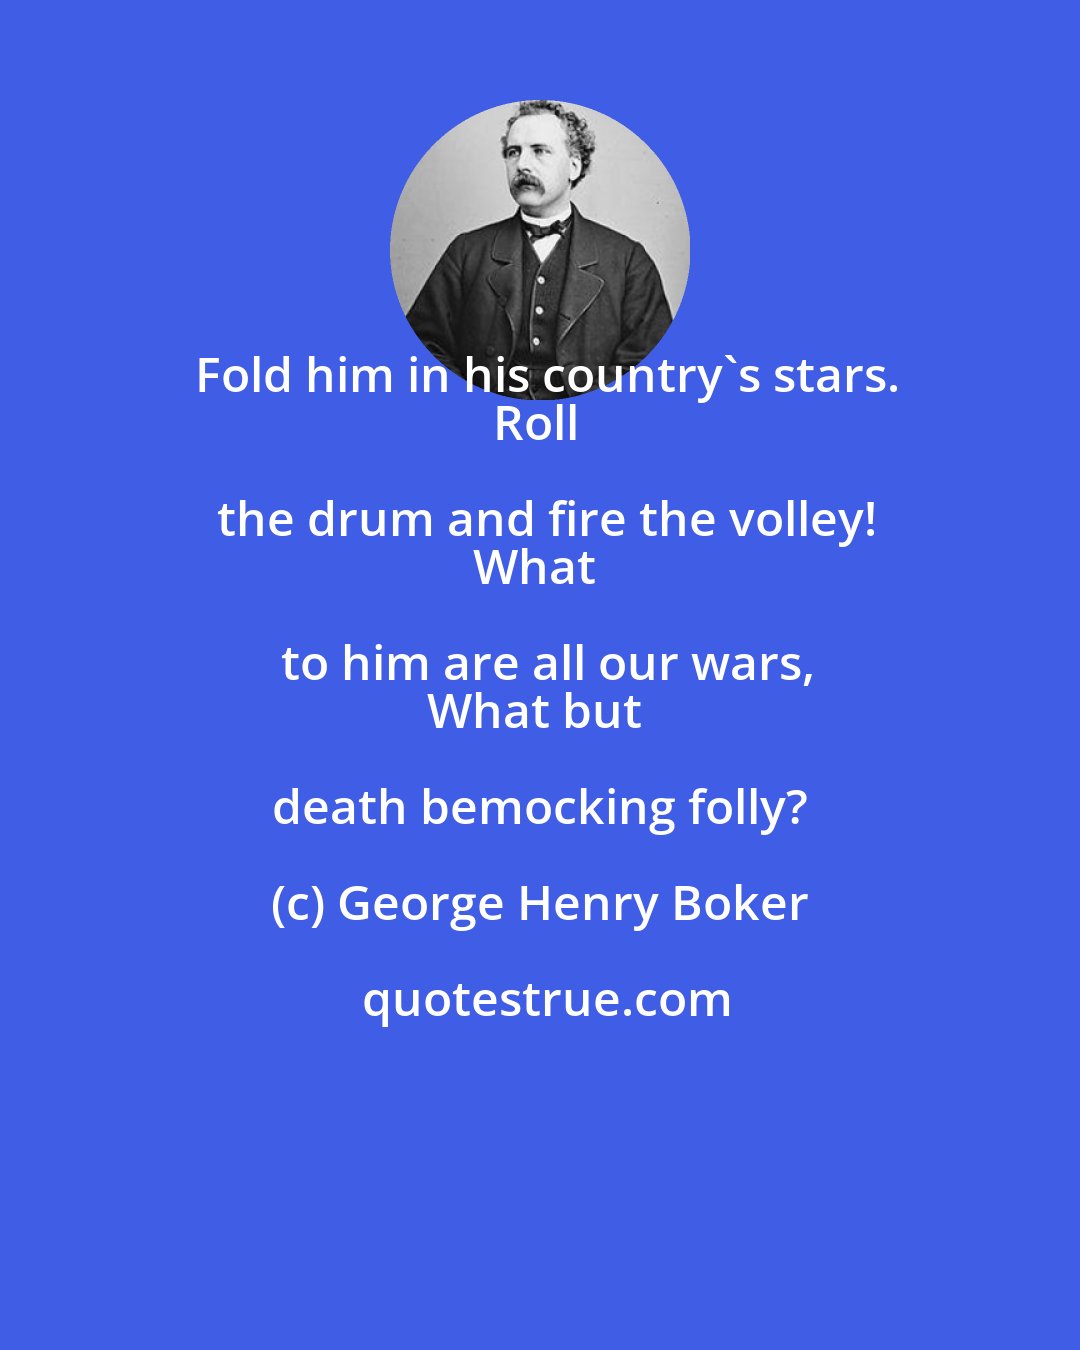 George Henry Boker: Fold him in his country's stars.
Roll the drum and fire the volley!
What to him are all our wars,
What but death bemocking folly?